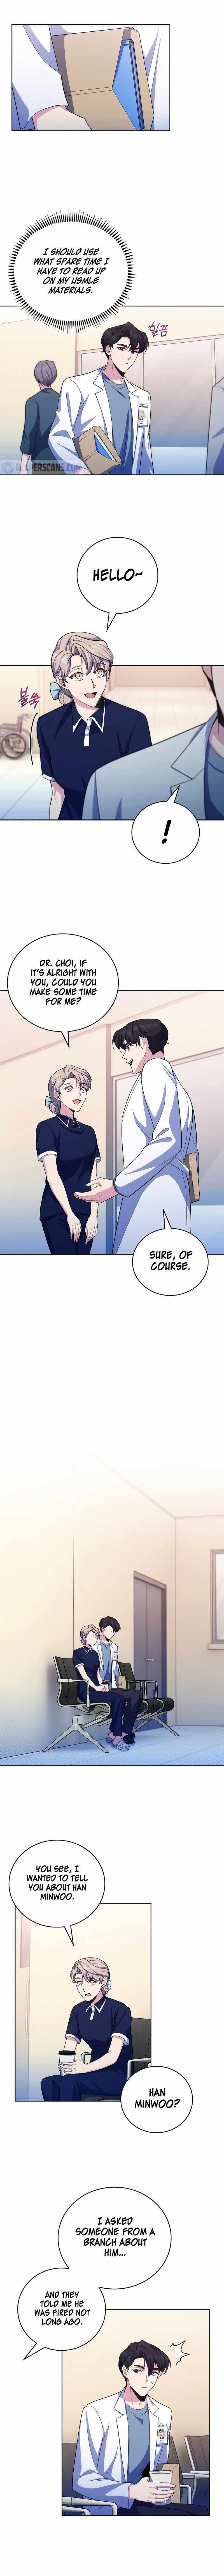 Level-Up Doctor (Manhwa) - Page 4